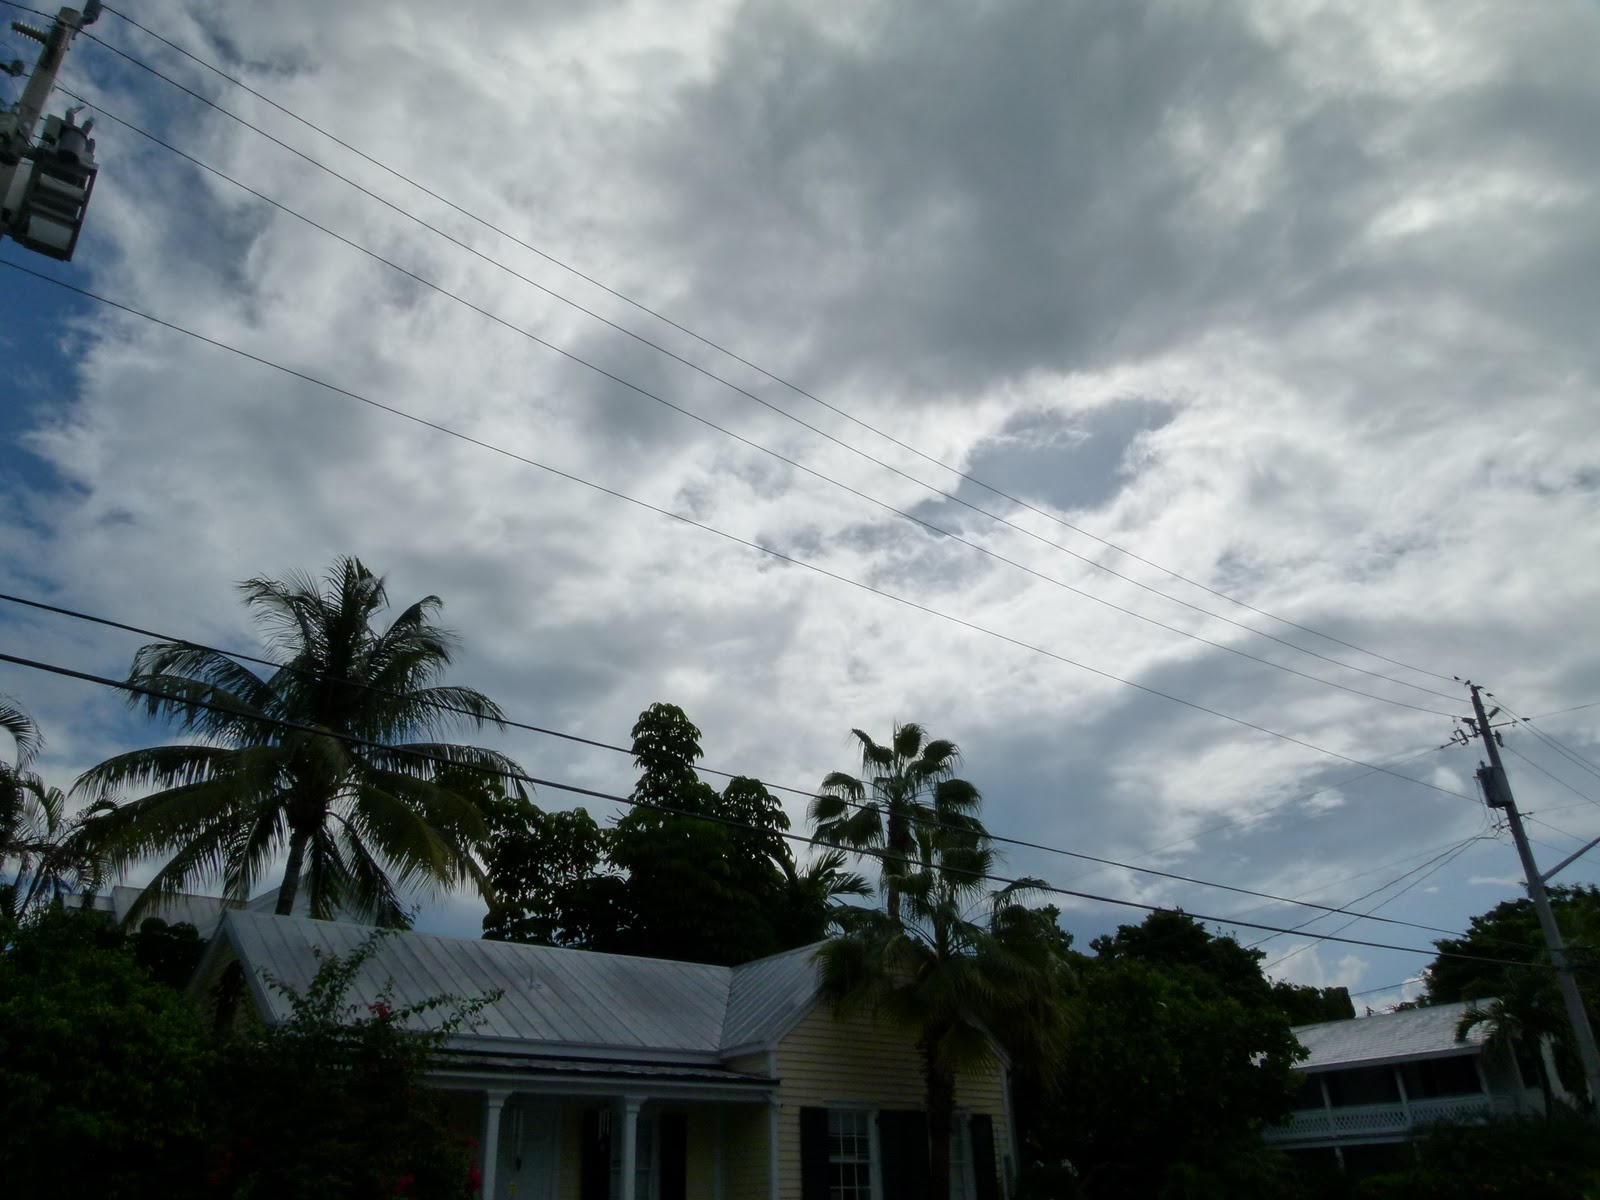 Visit Key West Key West rain, why it’s fun and 4 astounding KW rain facts